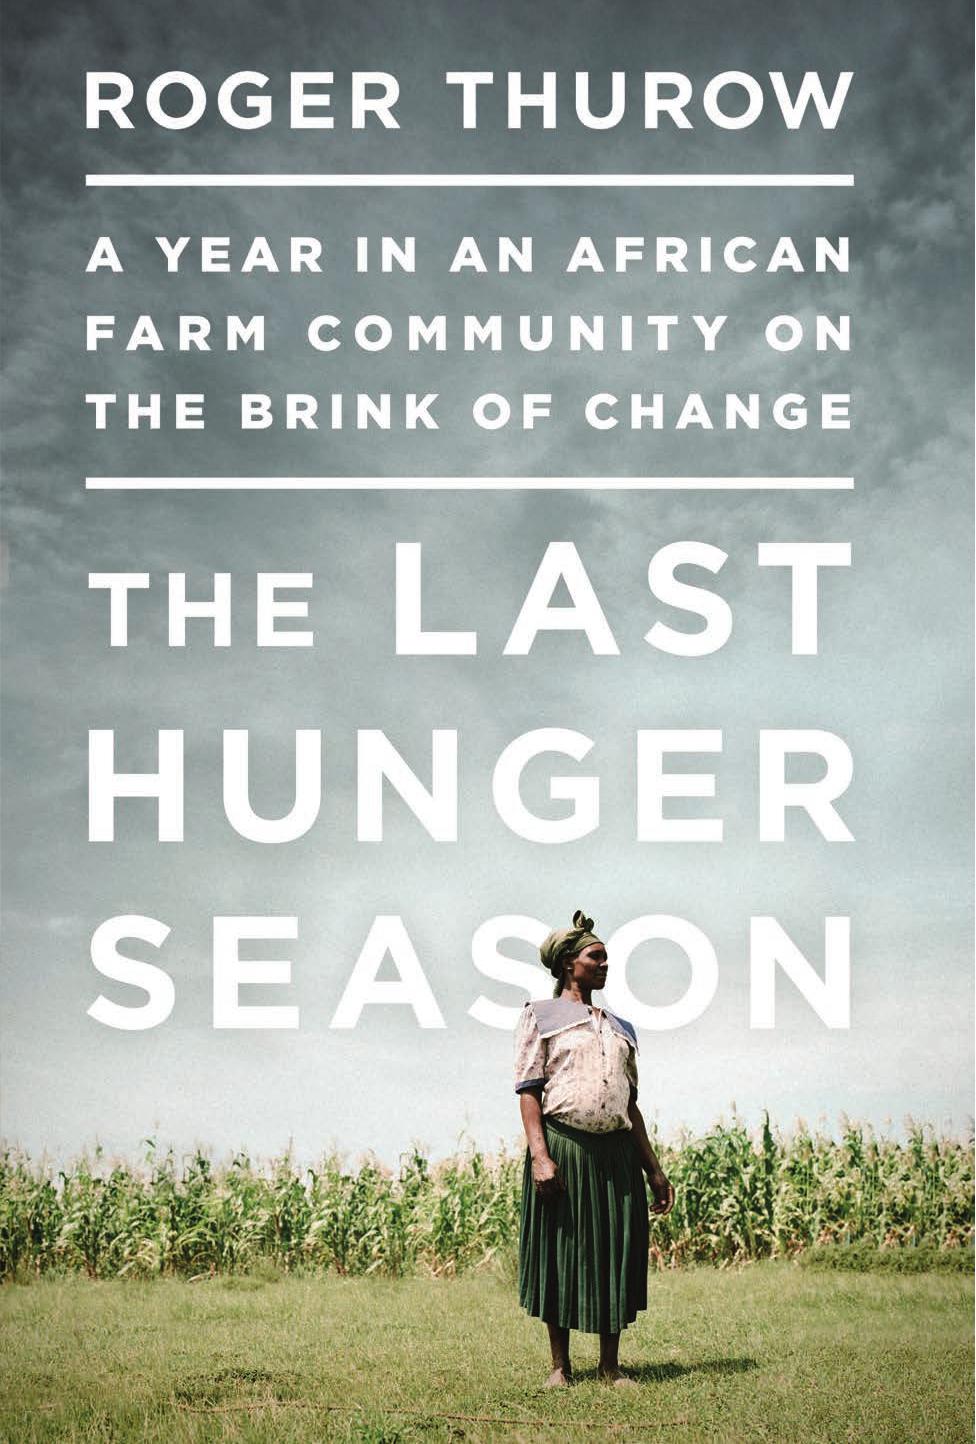 The Last Hunger Season by Roger Thurow